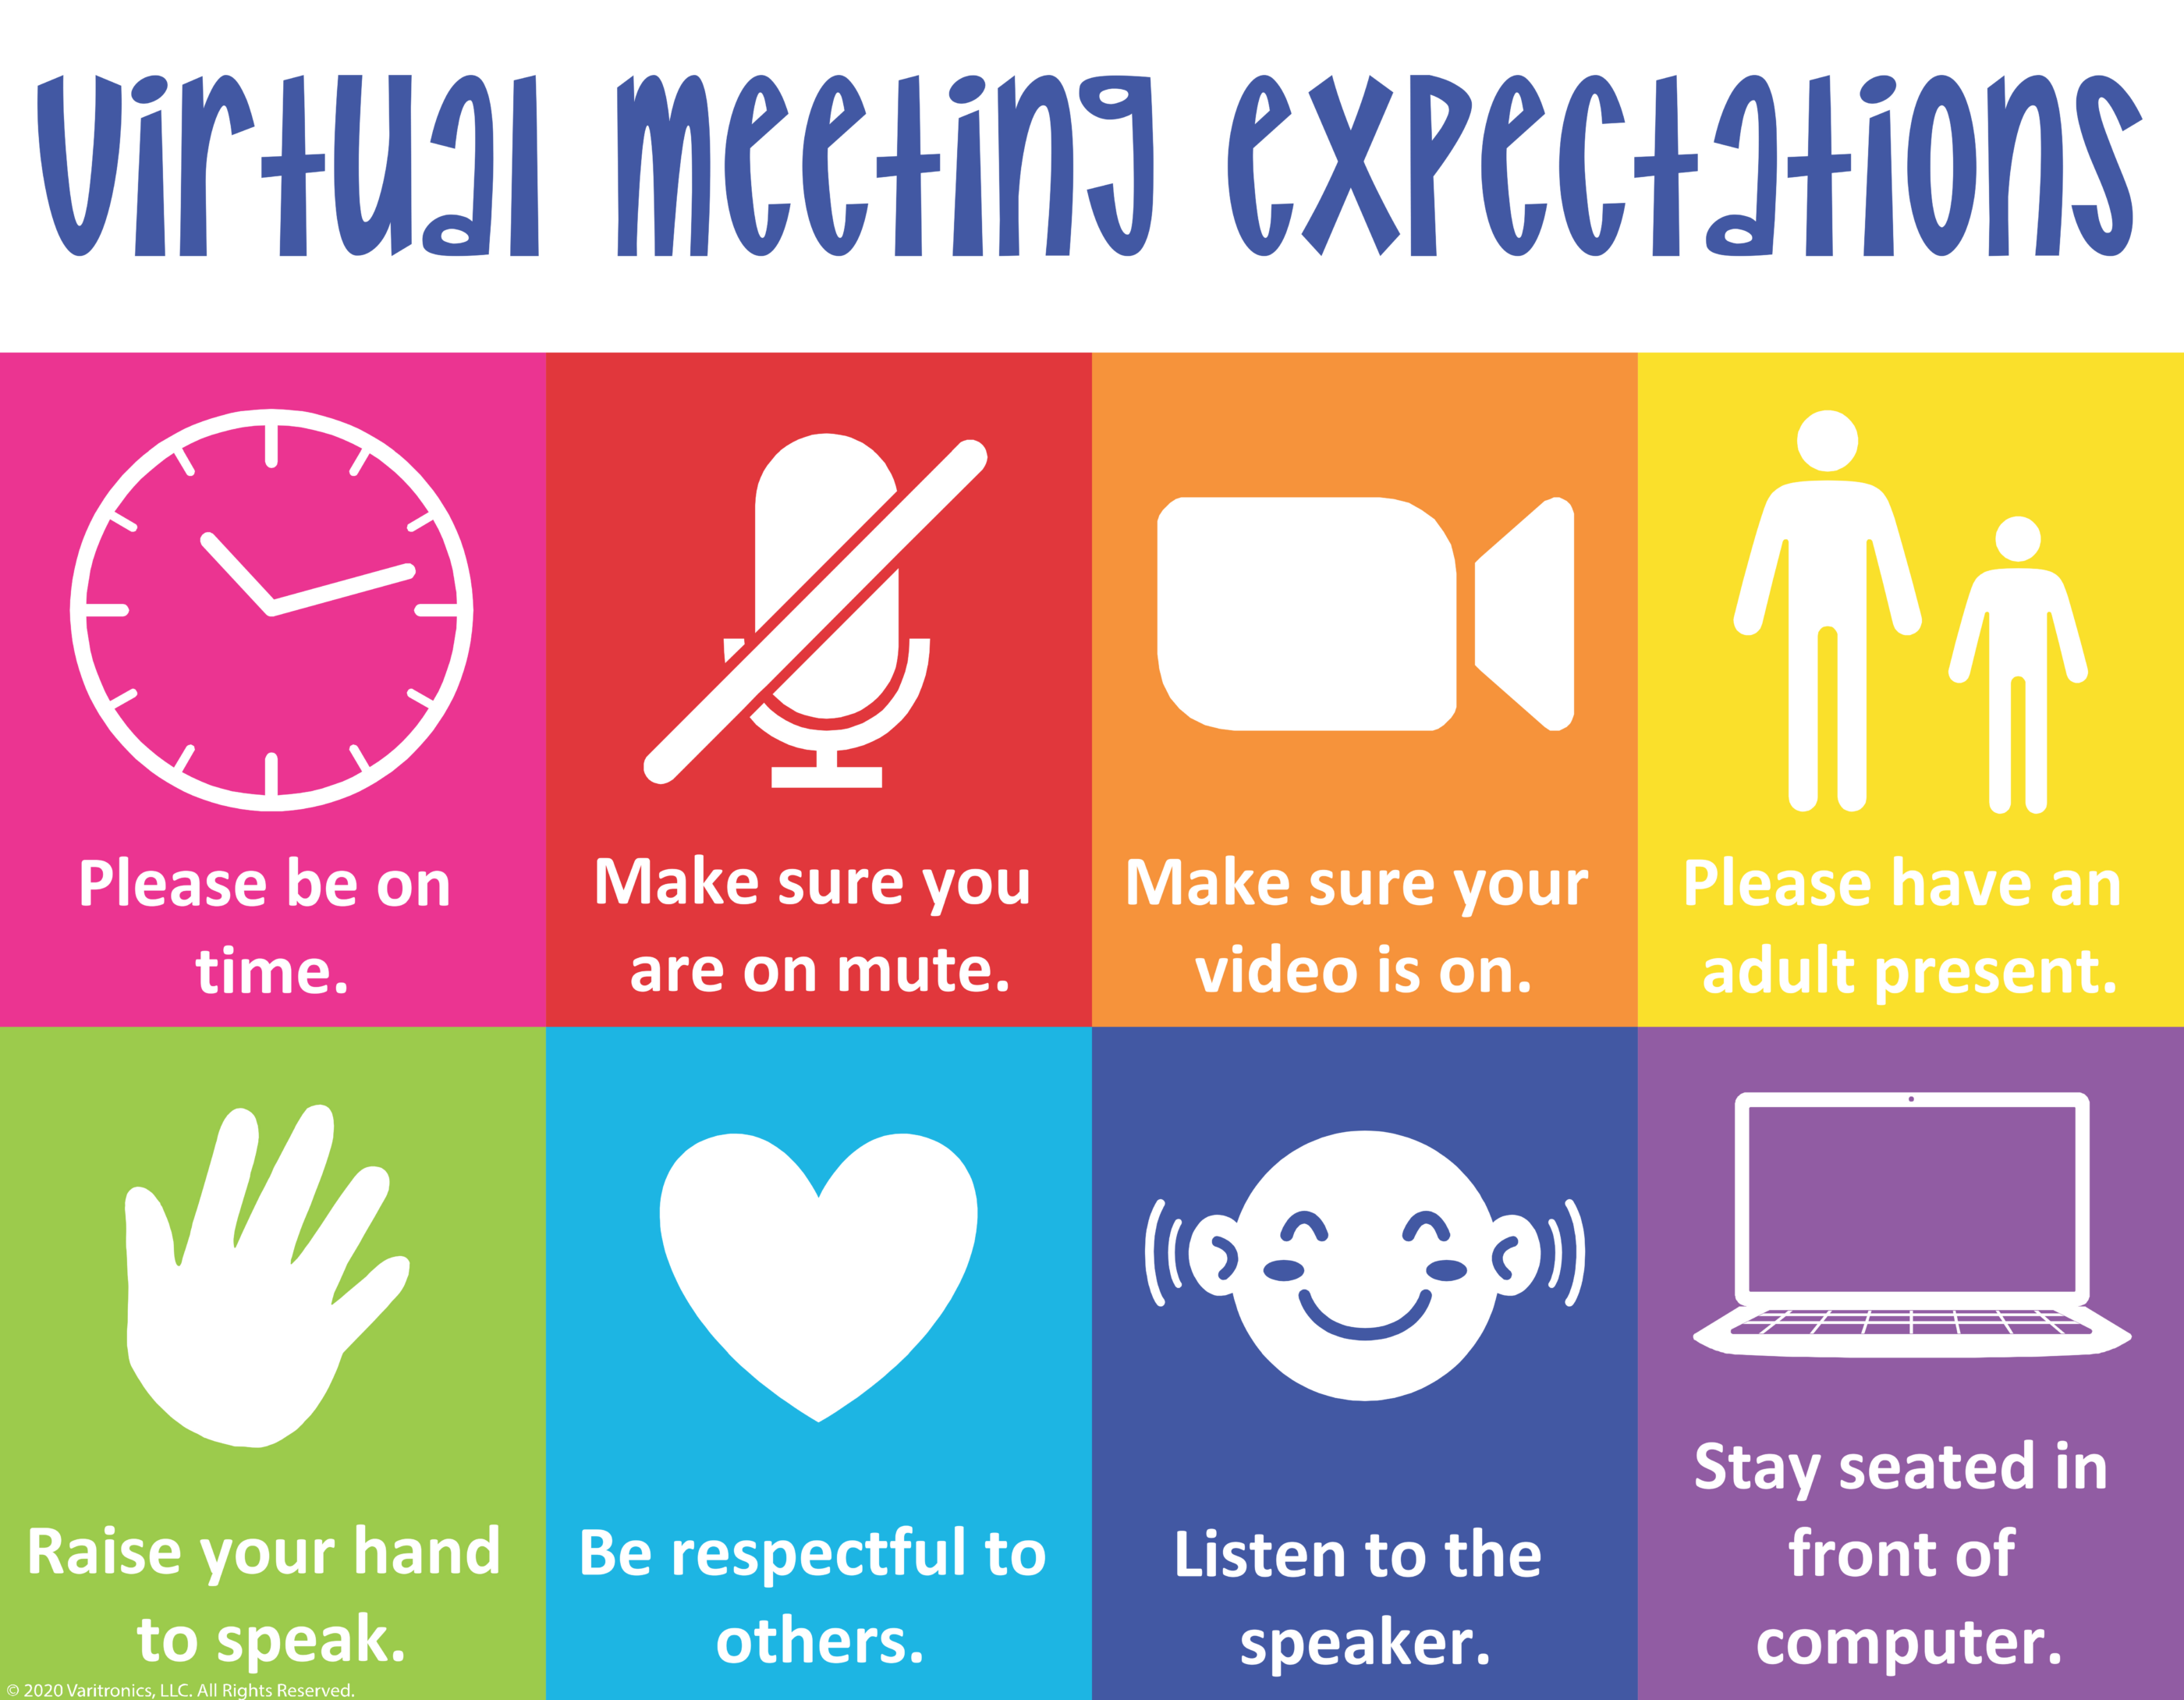 VariQuest perfecta output virtual meeting expectations poster